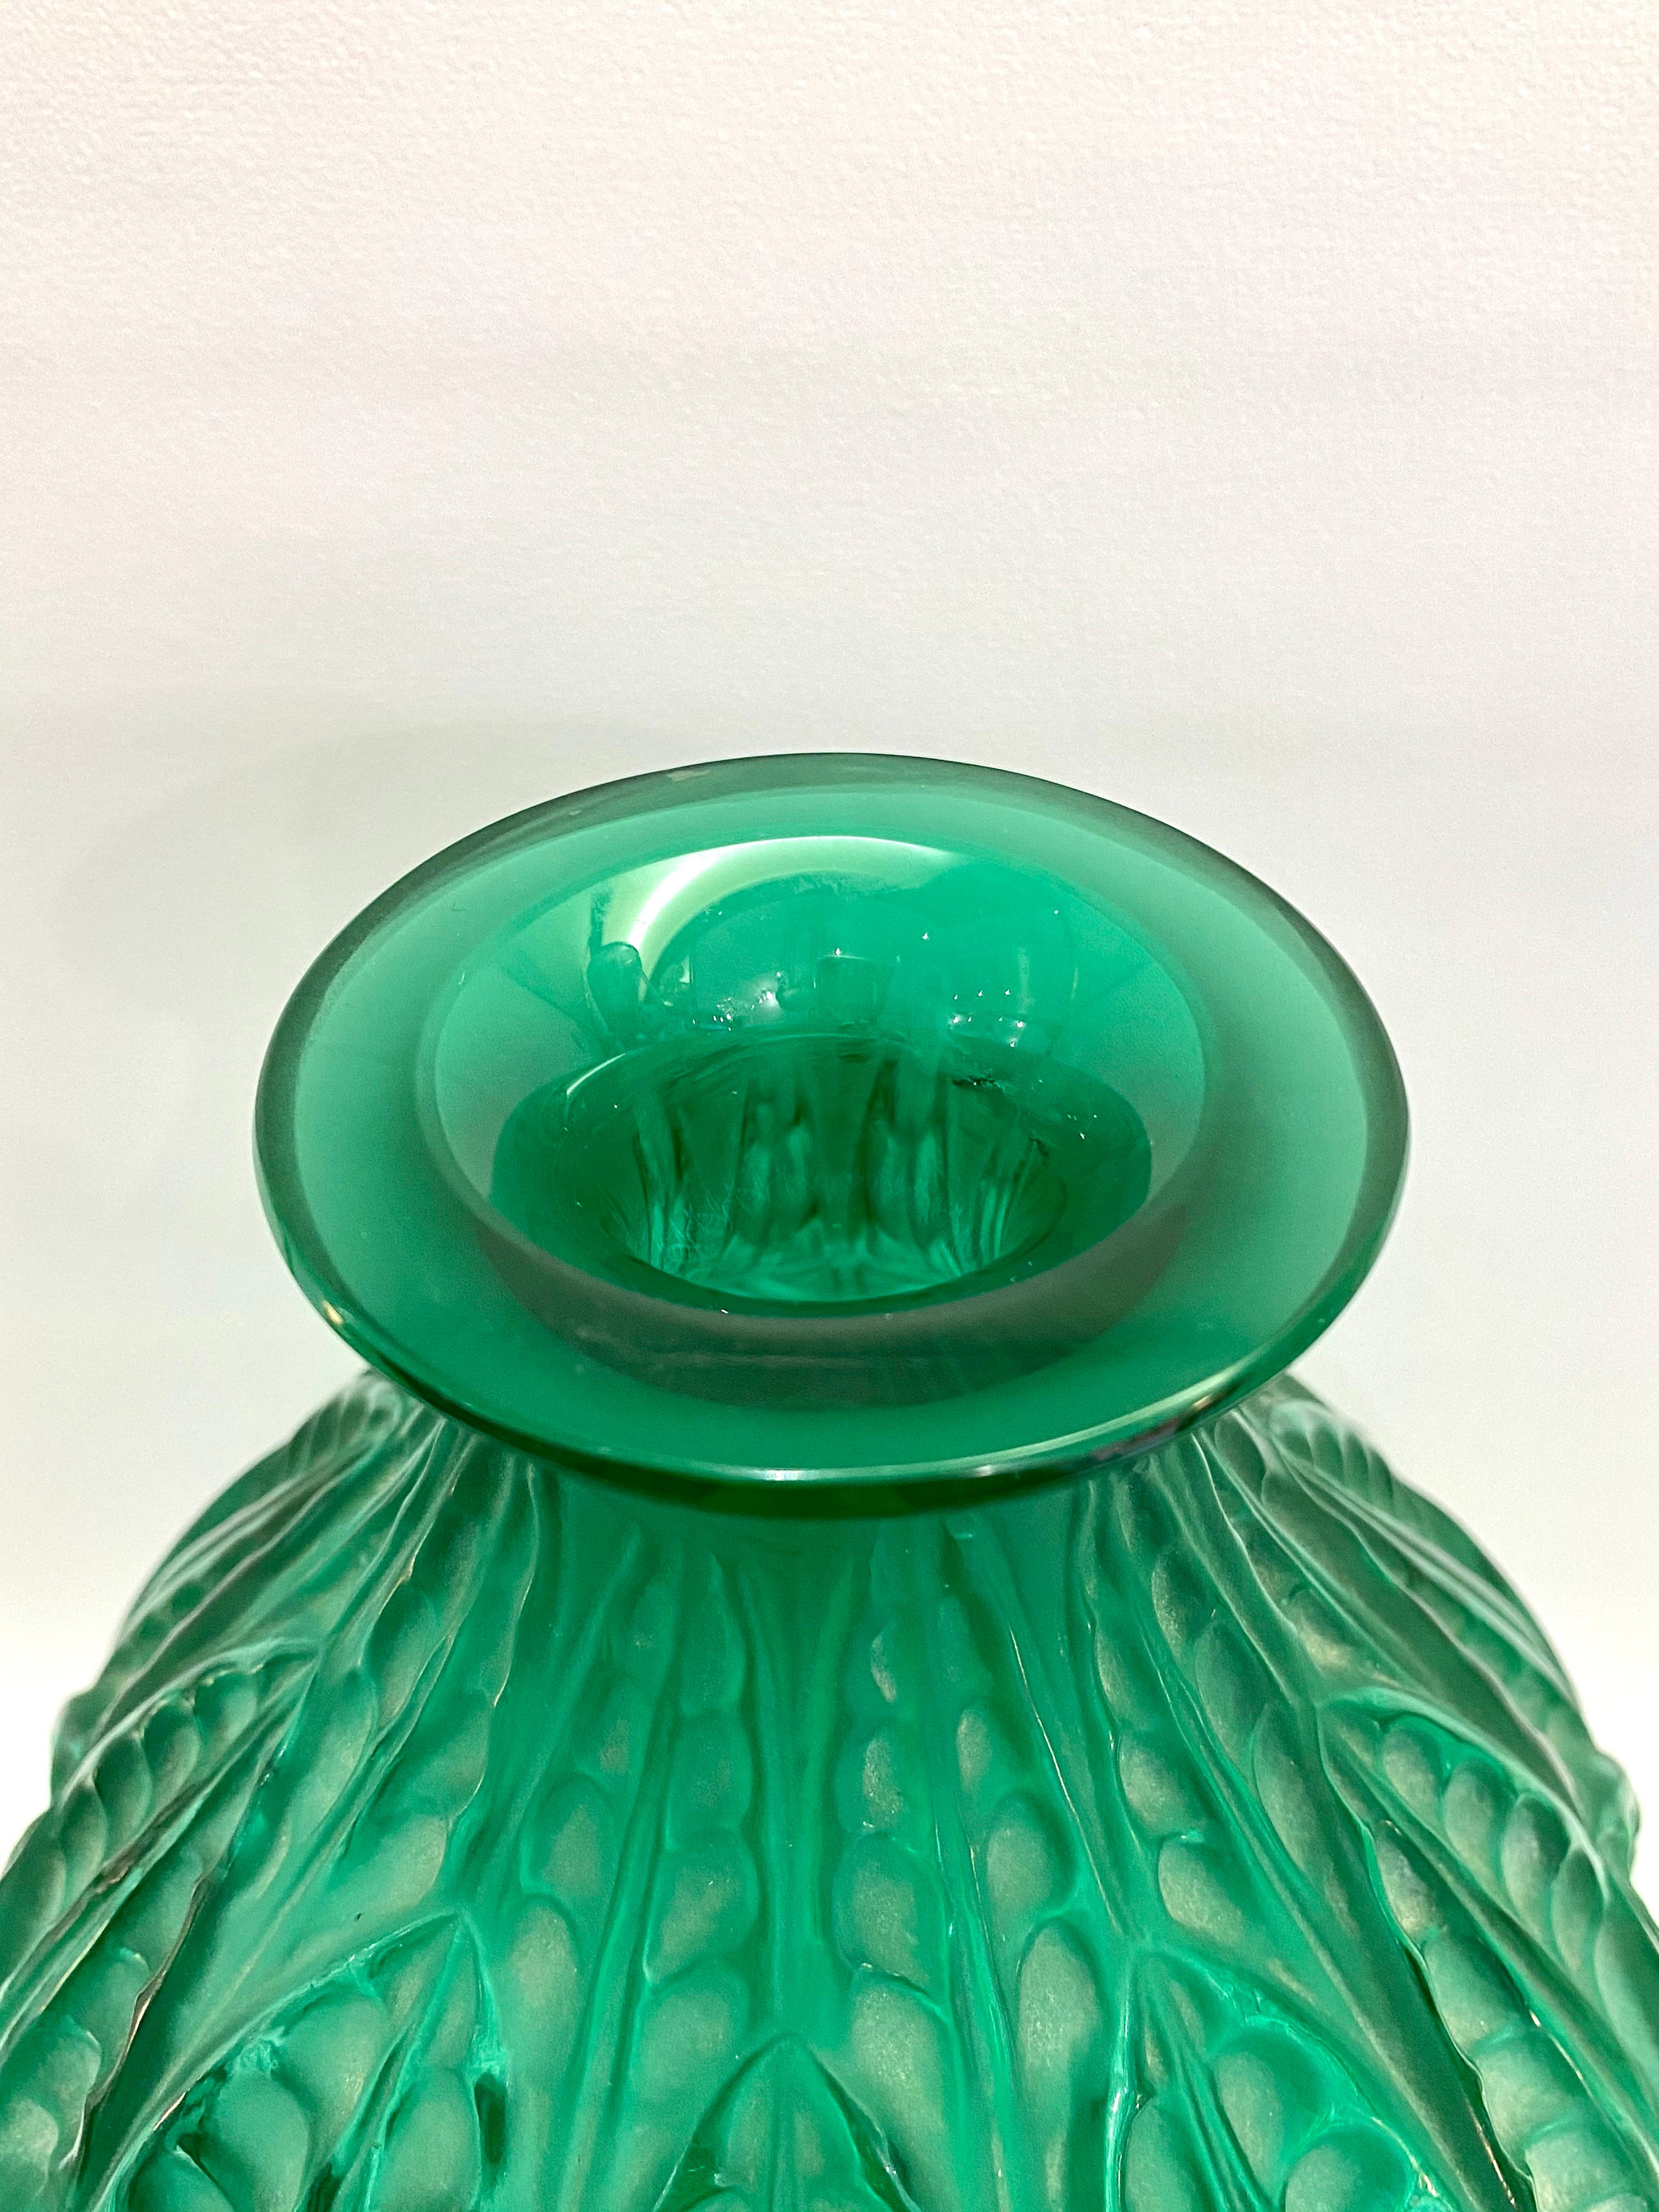 Molded 1927 René Lalique Malesherbes Vase in Emerald Green Glass Leaves